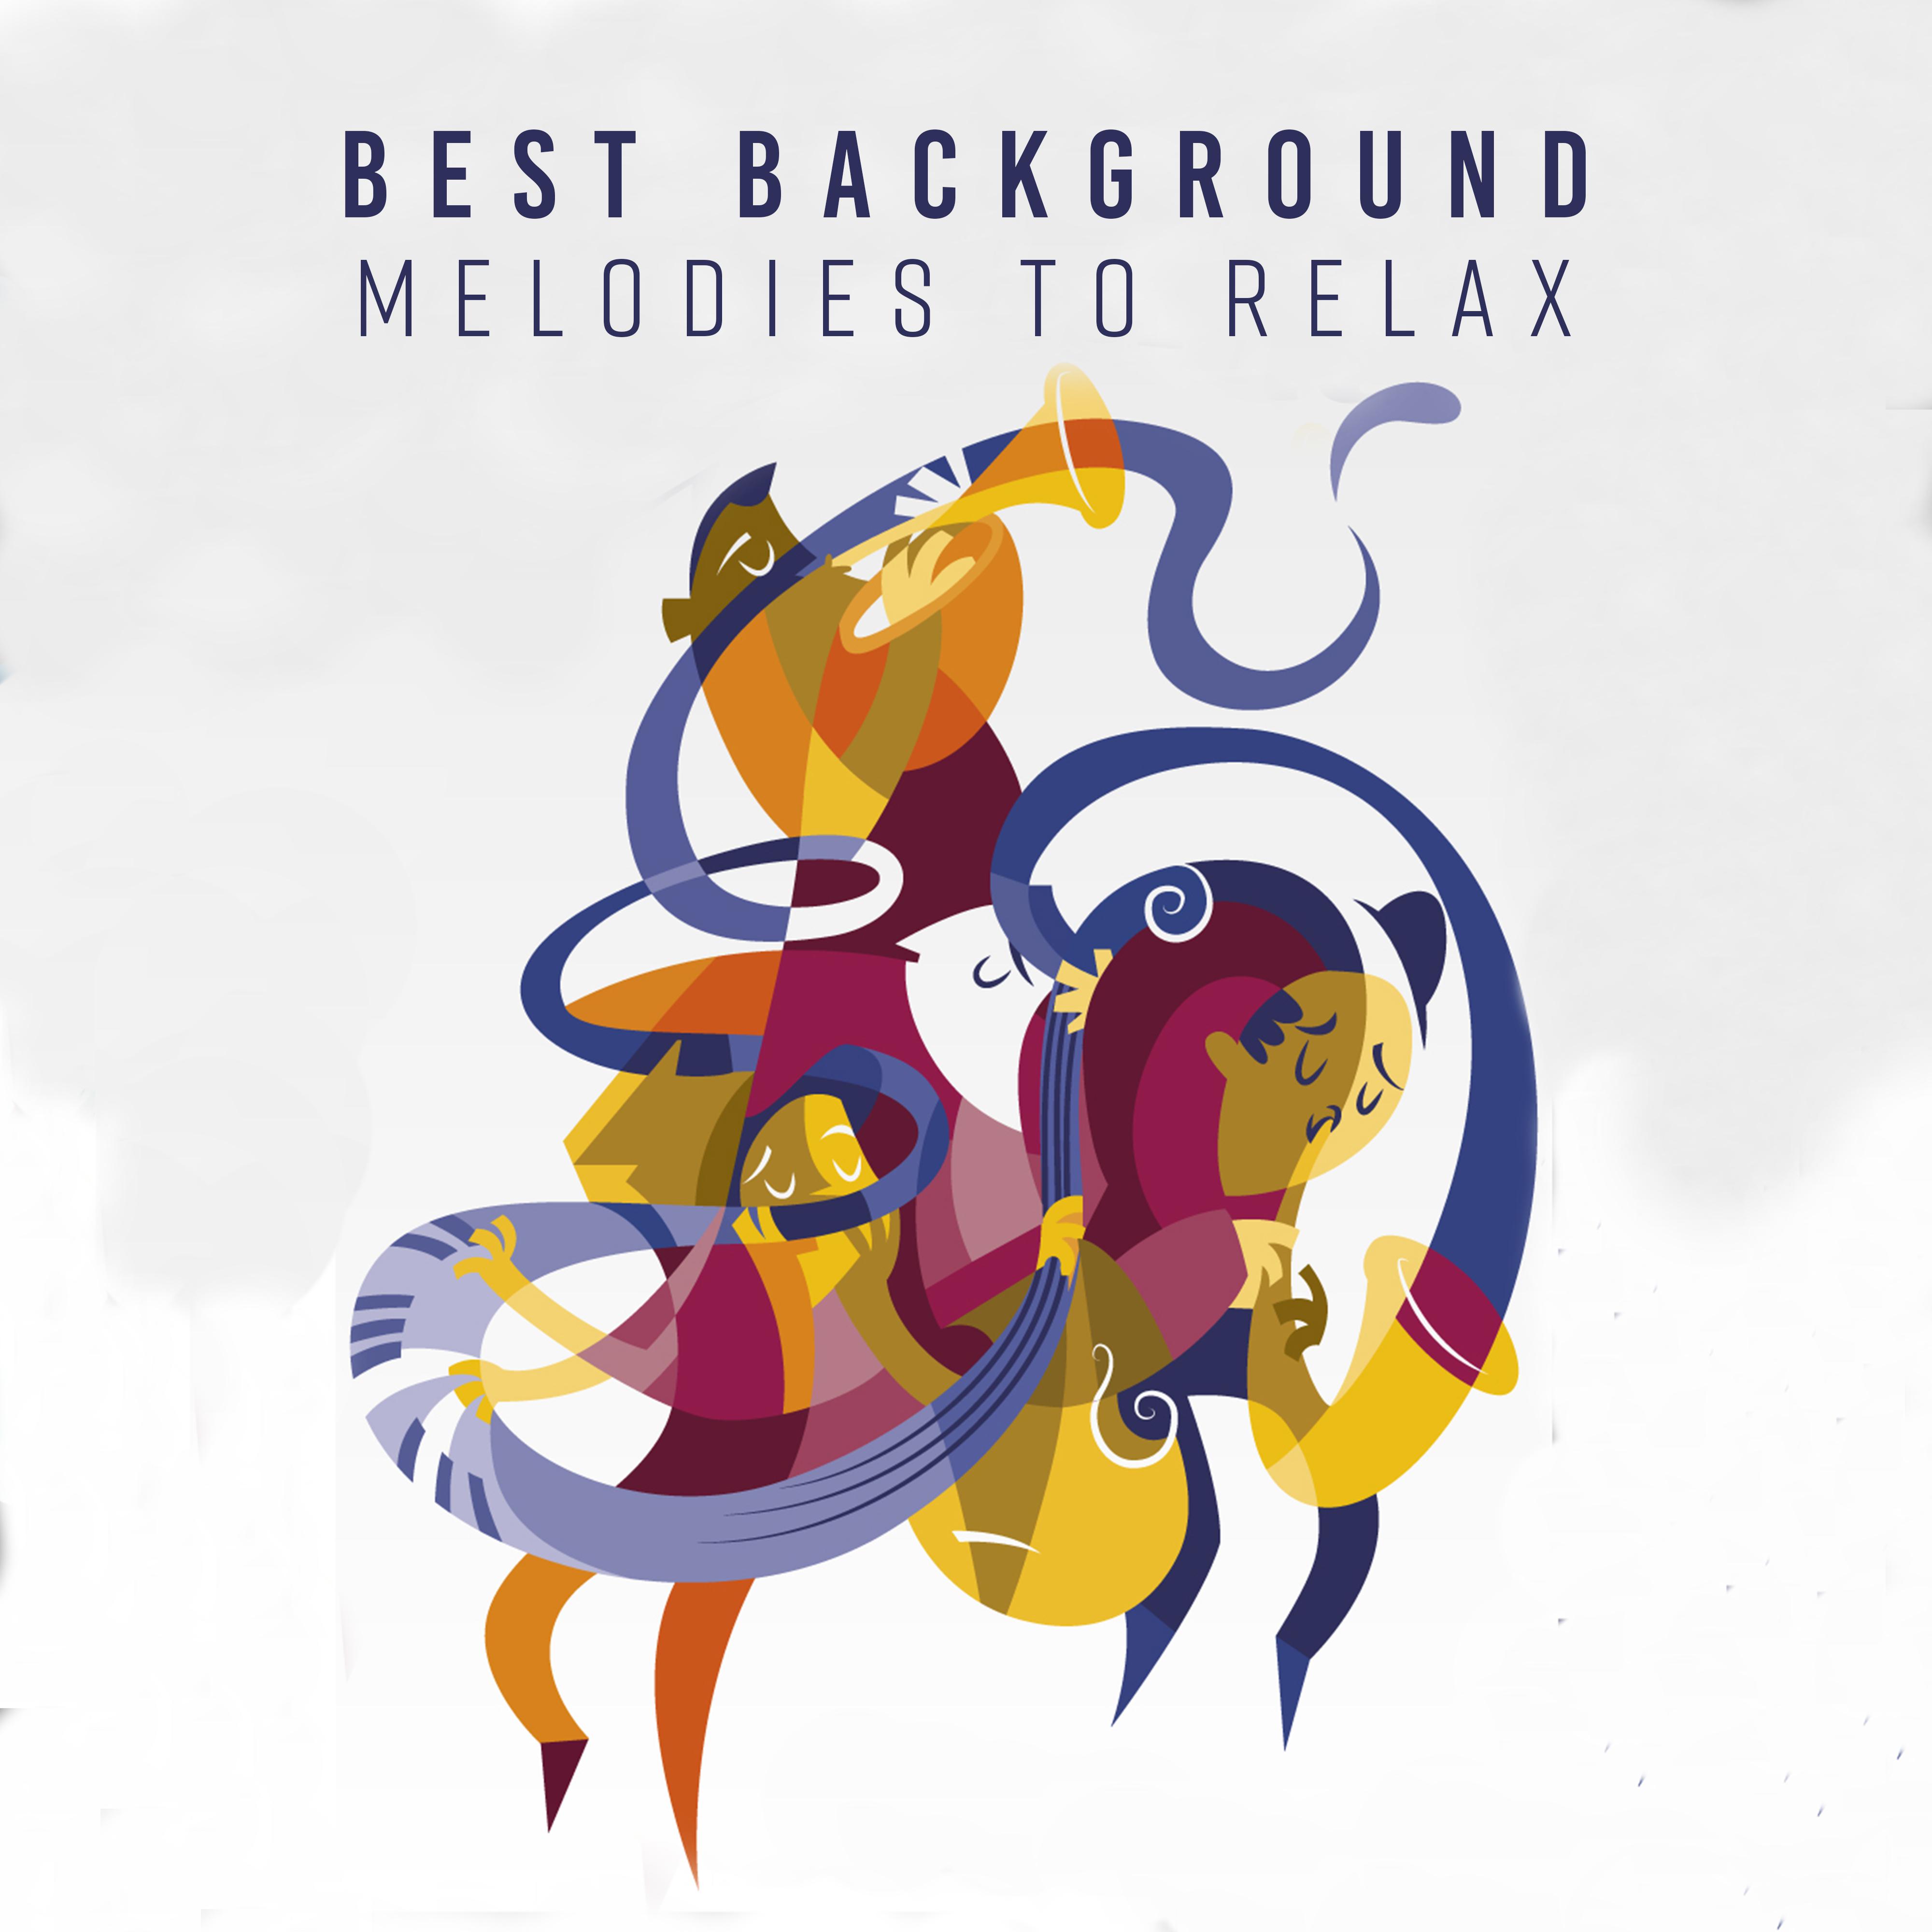 Best Background Melodies to Relax